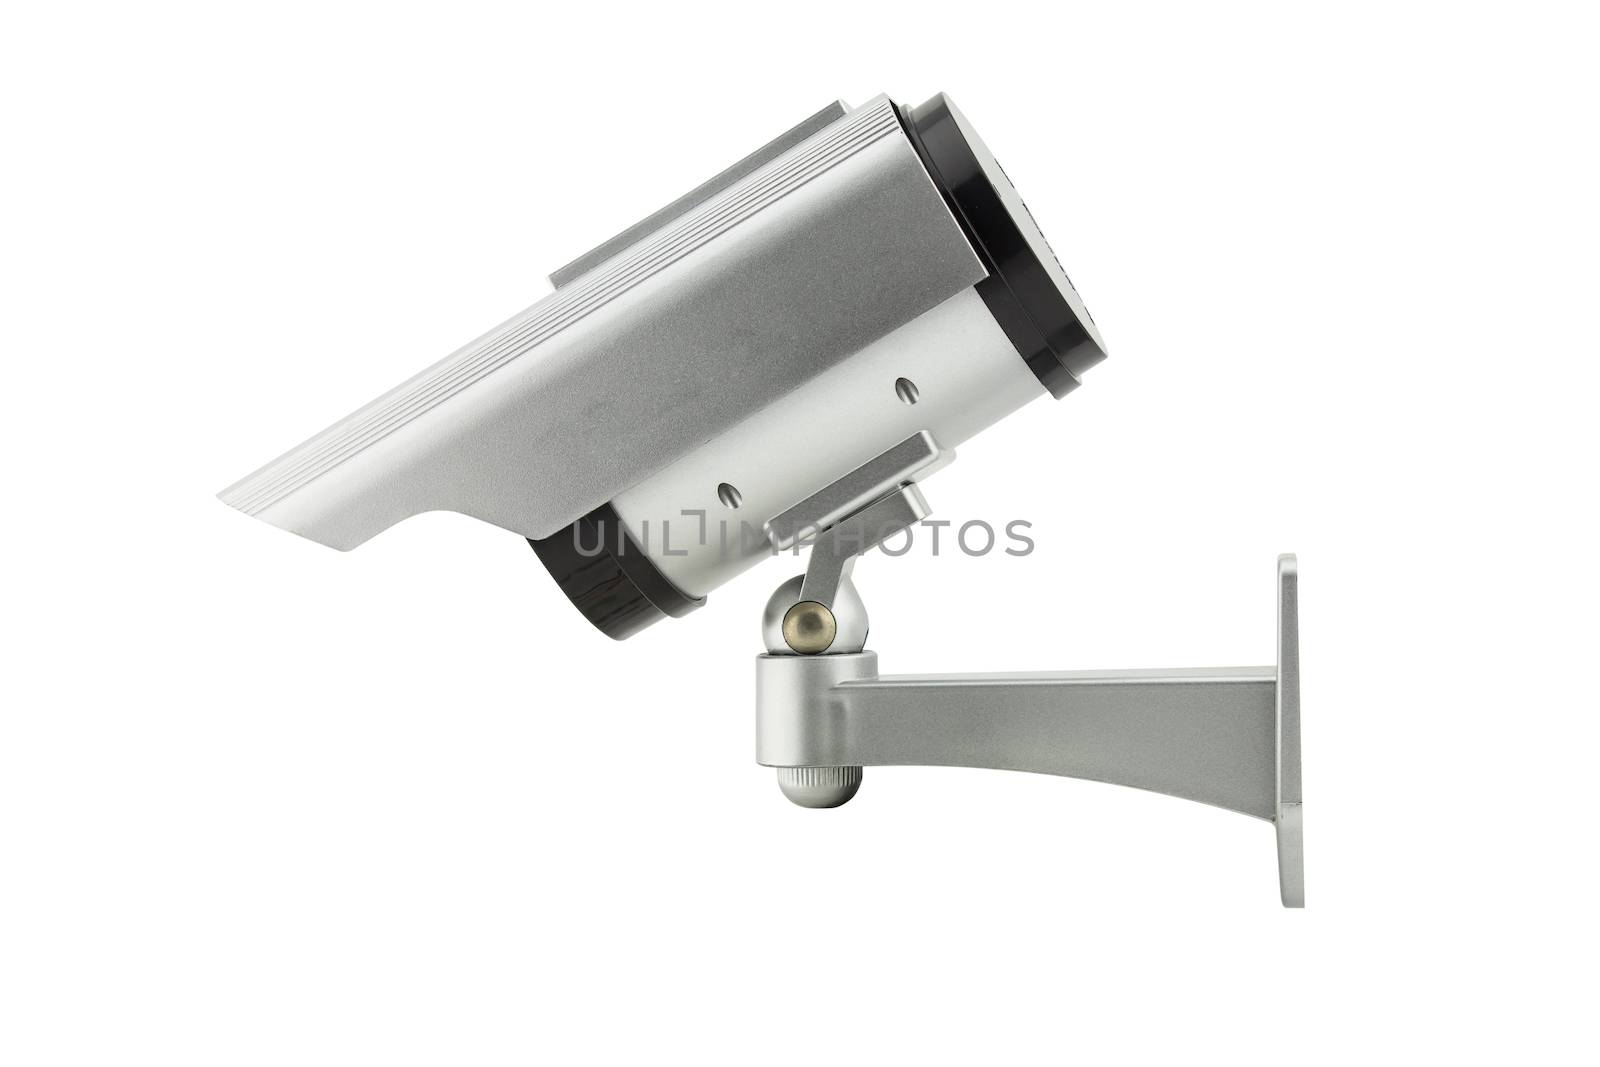 cctv camera isolated on white background  by vitawin